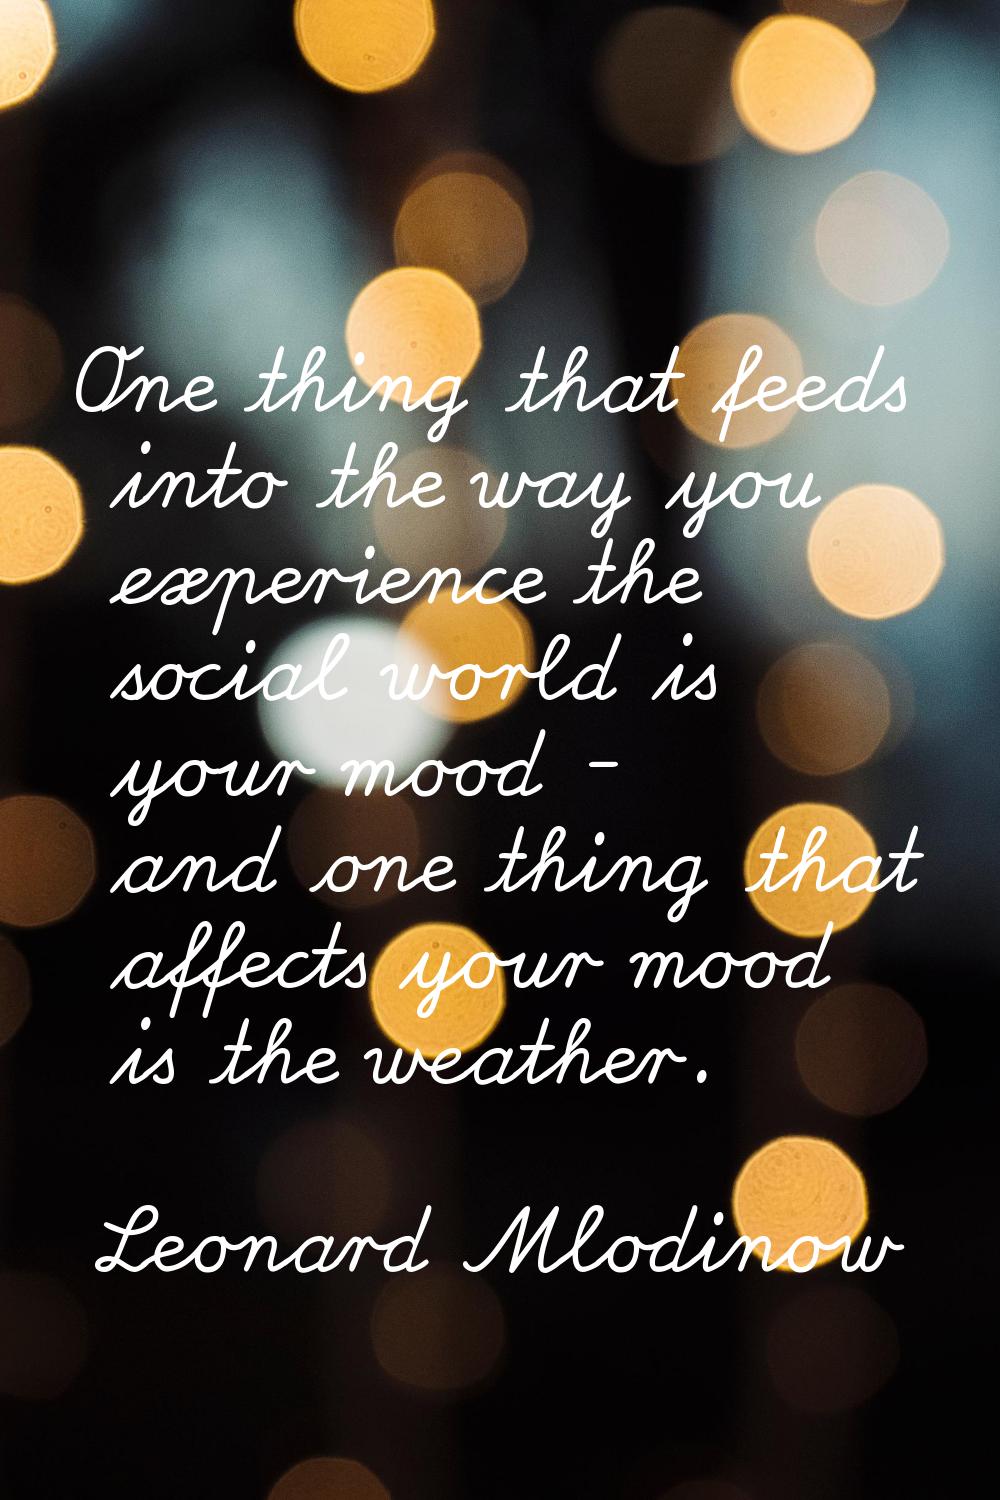 One thing that feeds into the way you experience the social world is your mood - and one thing that